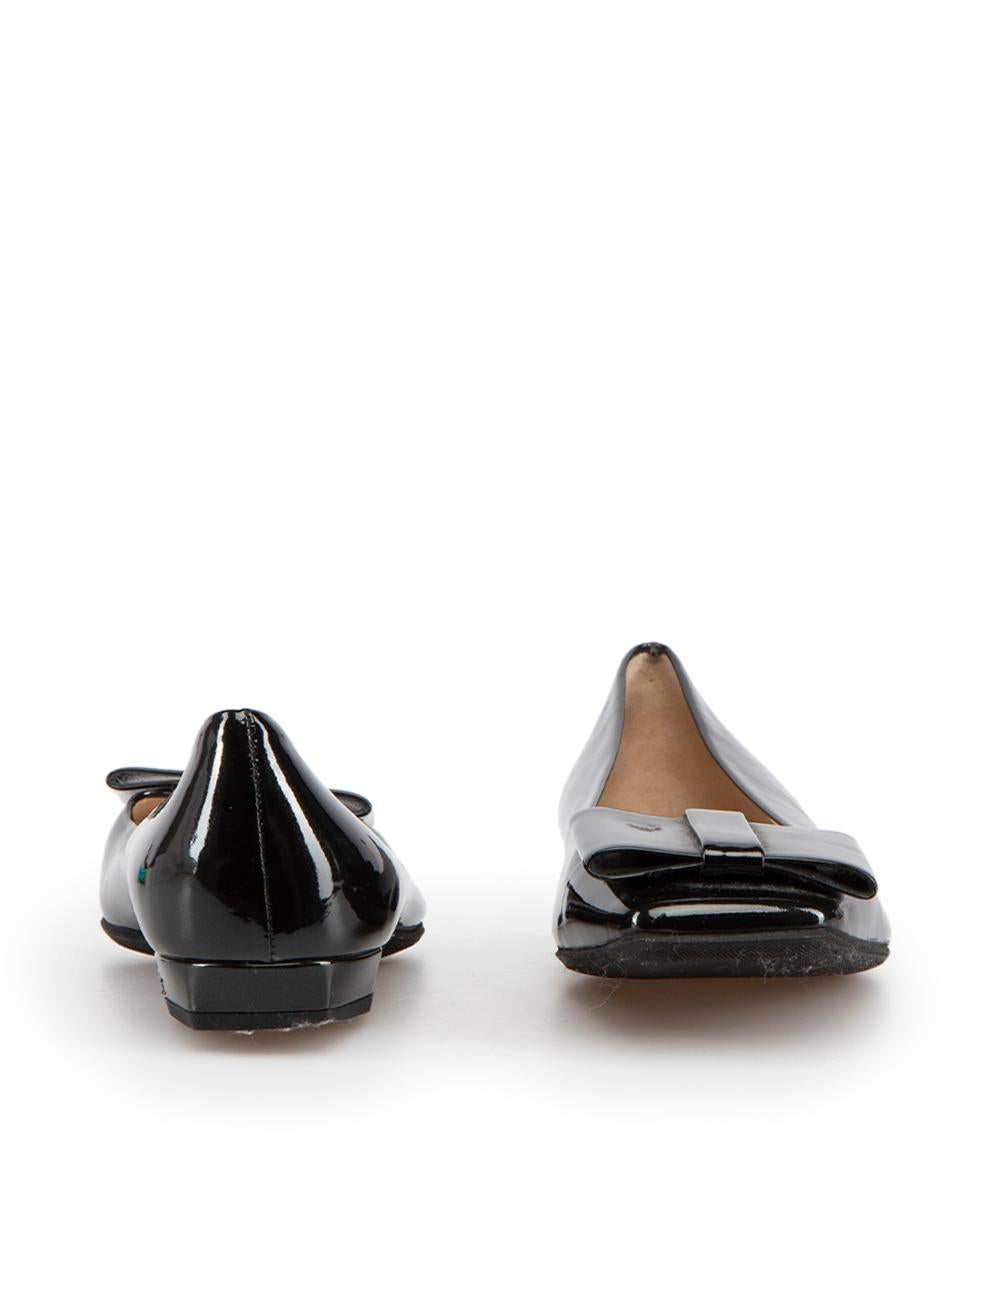 Prada Black Patent Leather Bow Ballet Flats Size IT 36 In Good Condition For Sale In London, GB